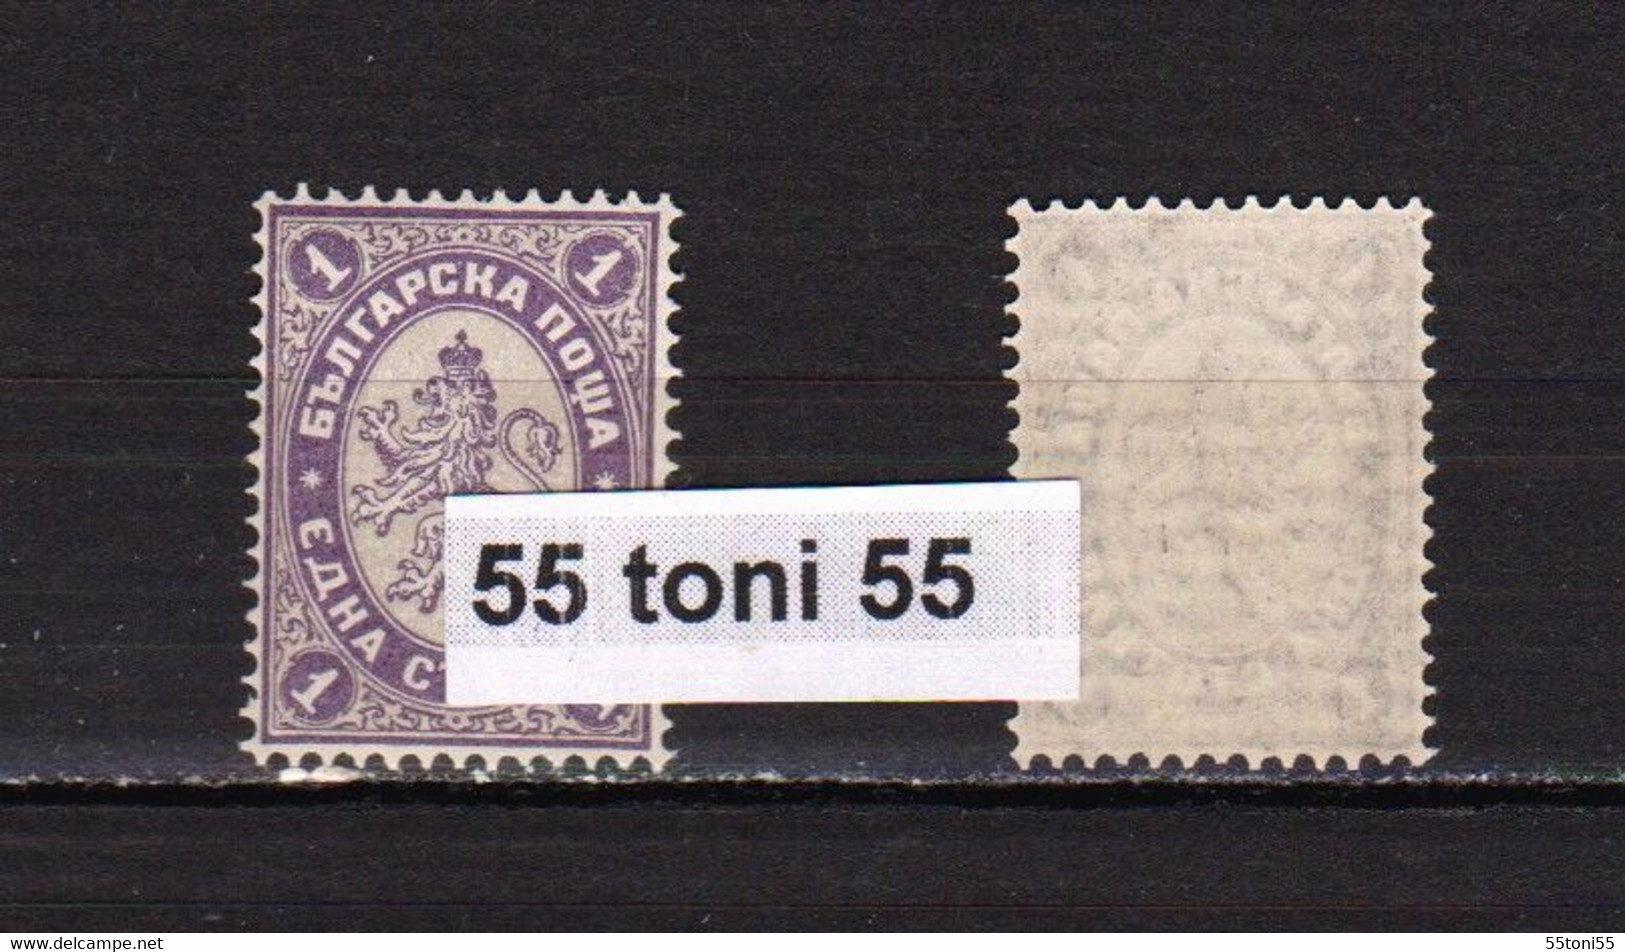 1886  BIG LION (Michel-25) STAMPS - MNH Perfect Quality Bulgaria / Bulgarie - Unused Stamps